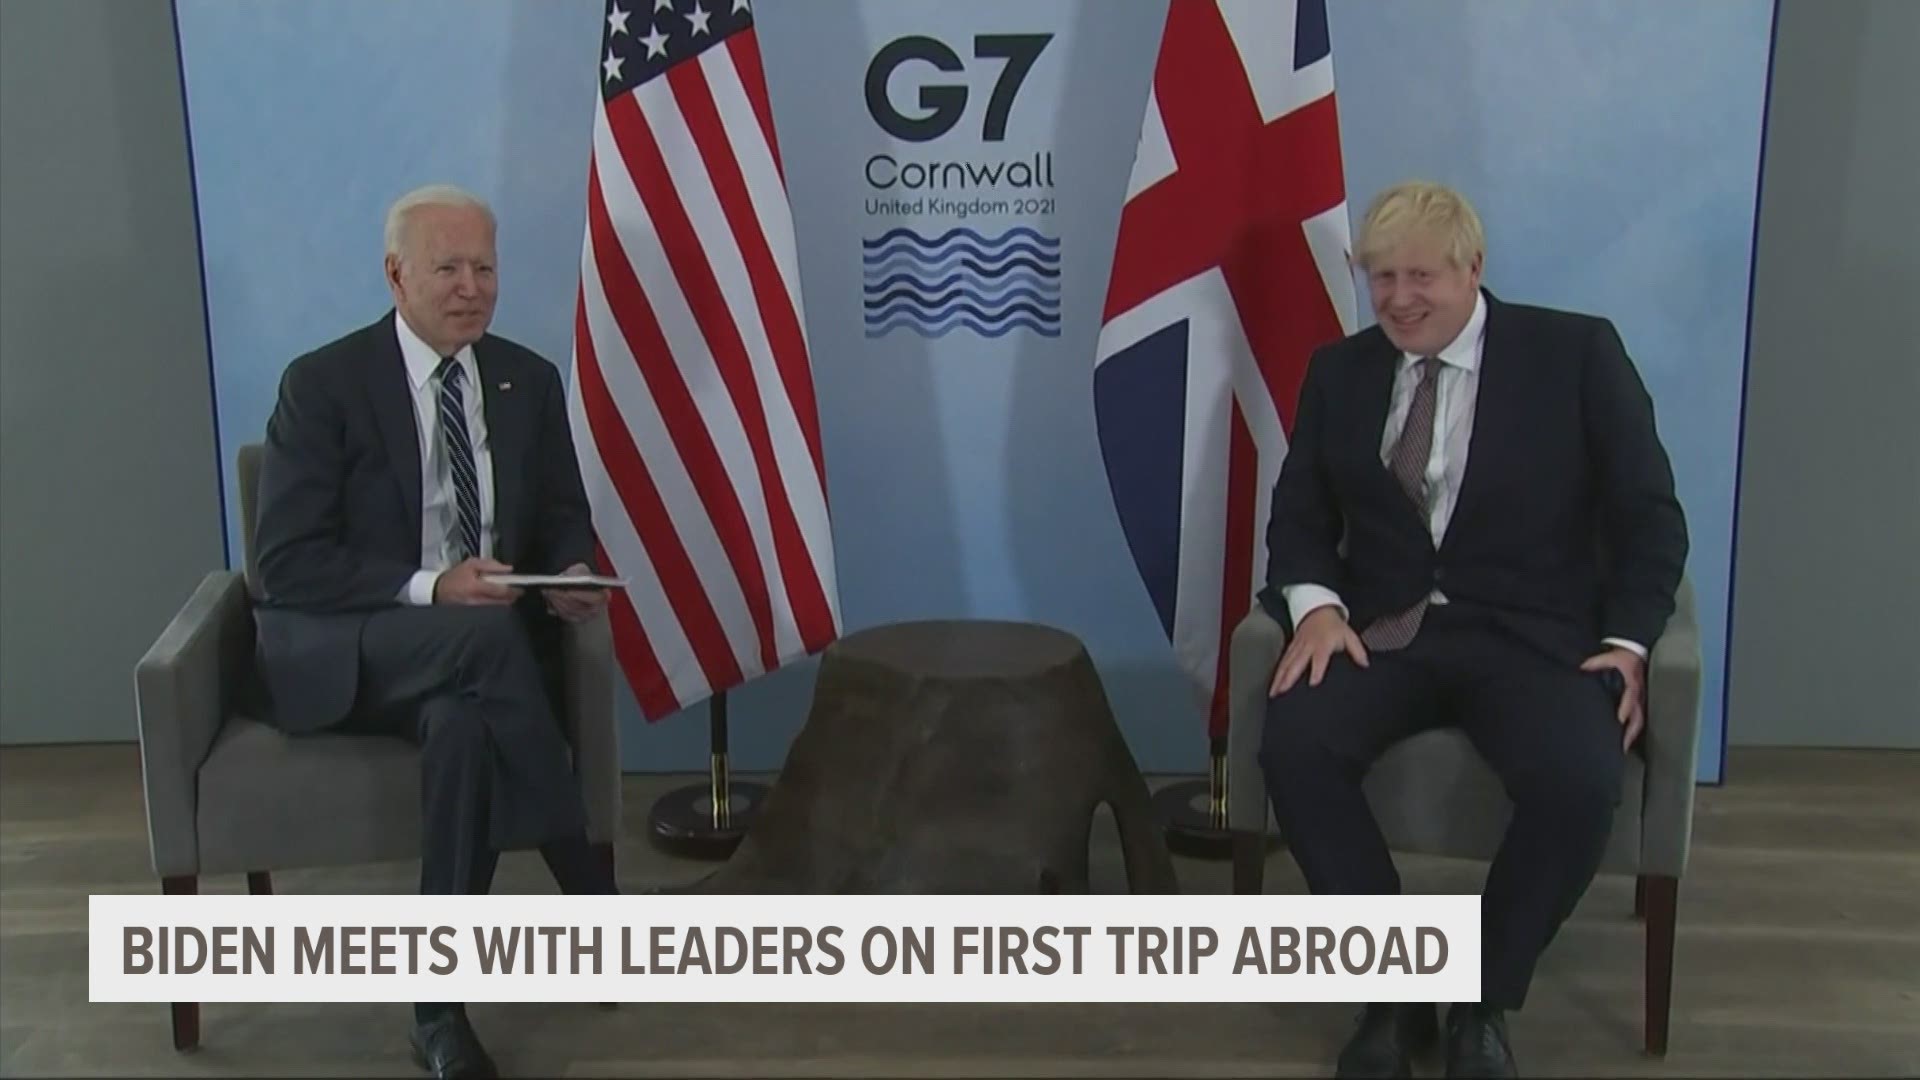 Biden and Borus Johnson also announced a new U.S.-U.K. task force to work on resuming travel between the two nations amid the pandemic.